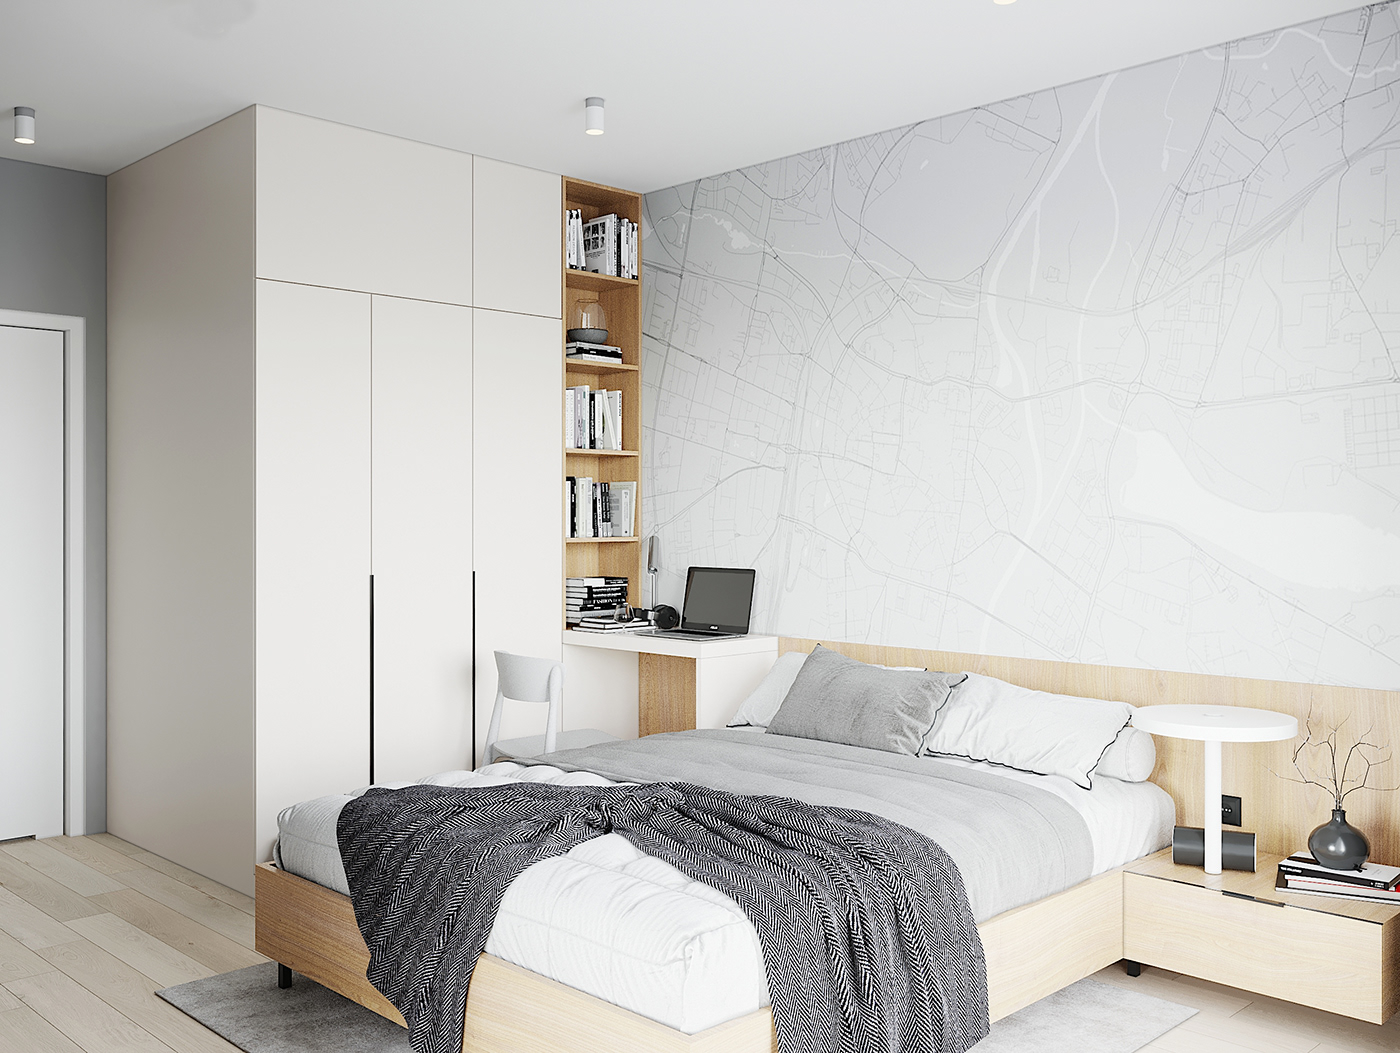 Designer ingeniously incorporates a working corner at the head of the bed to save space. The working area is intended to be minimalistic and light.